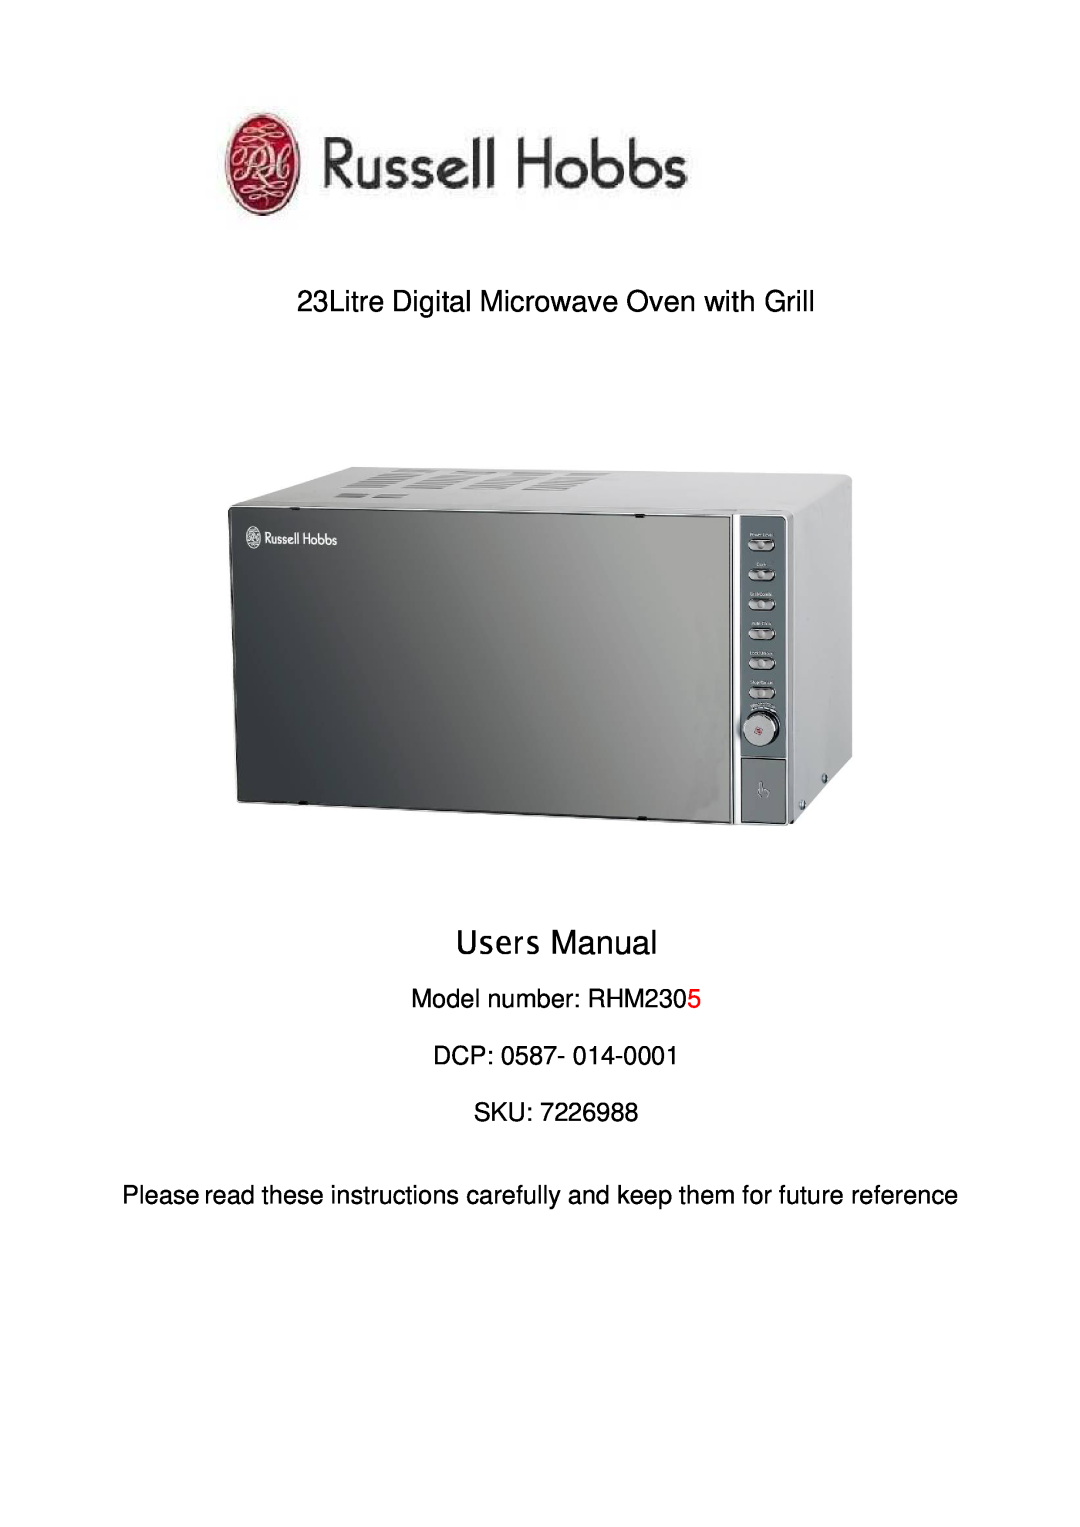 Russell Hobbs user manual Model number RHM2305 DCP 0587- SKU, Users Manual, 23Litre Digital Microwave Oven with Grill 